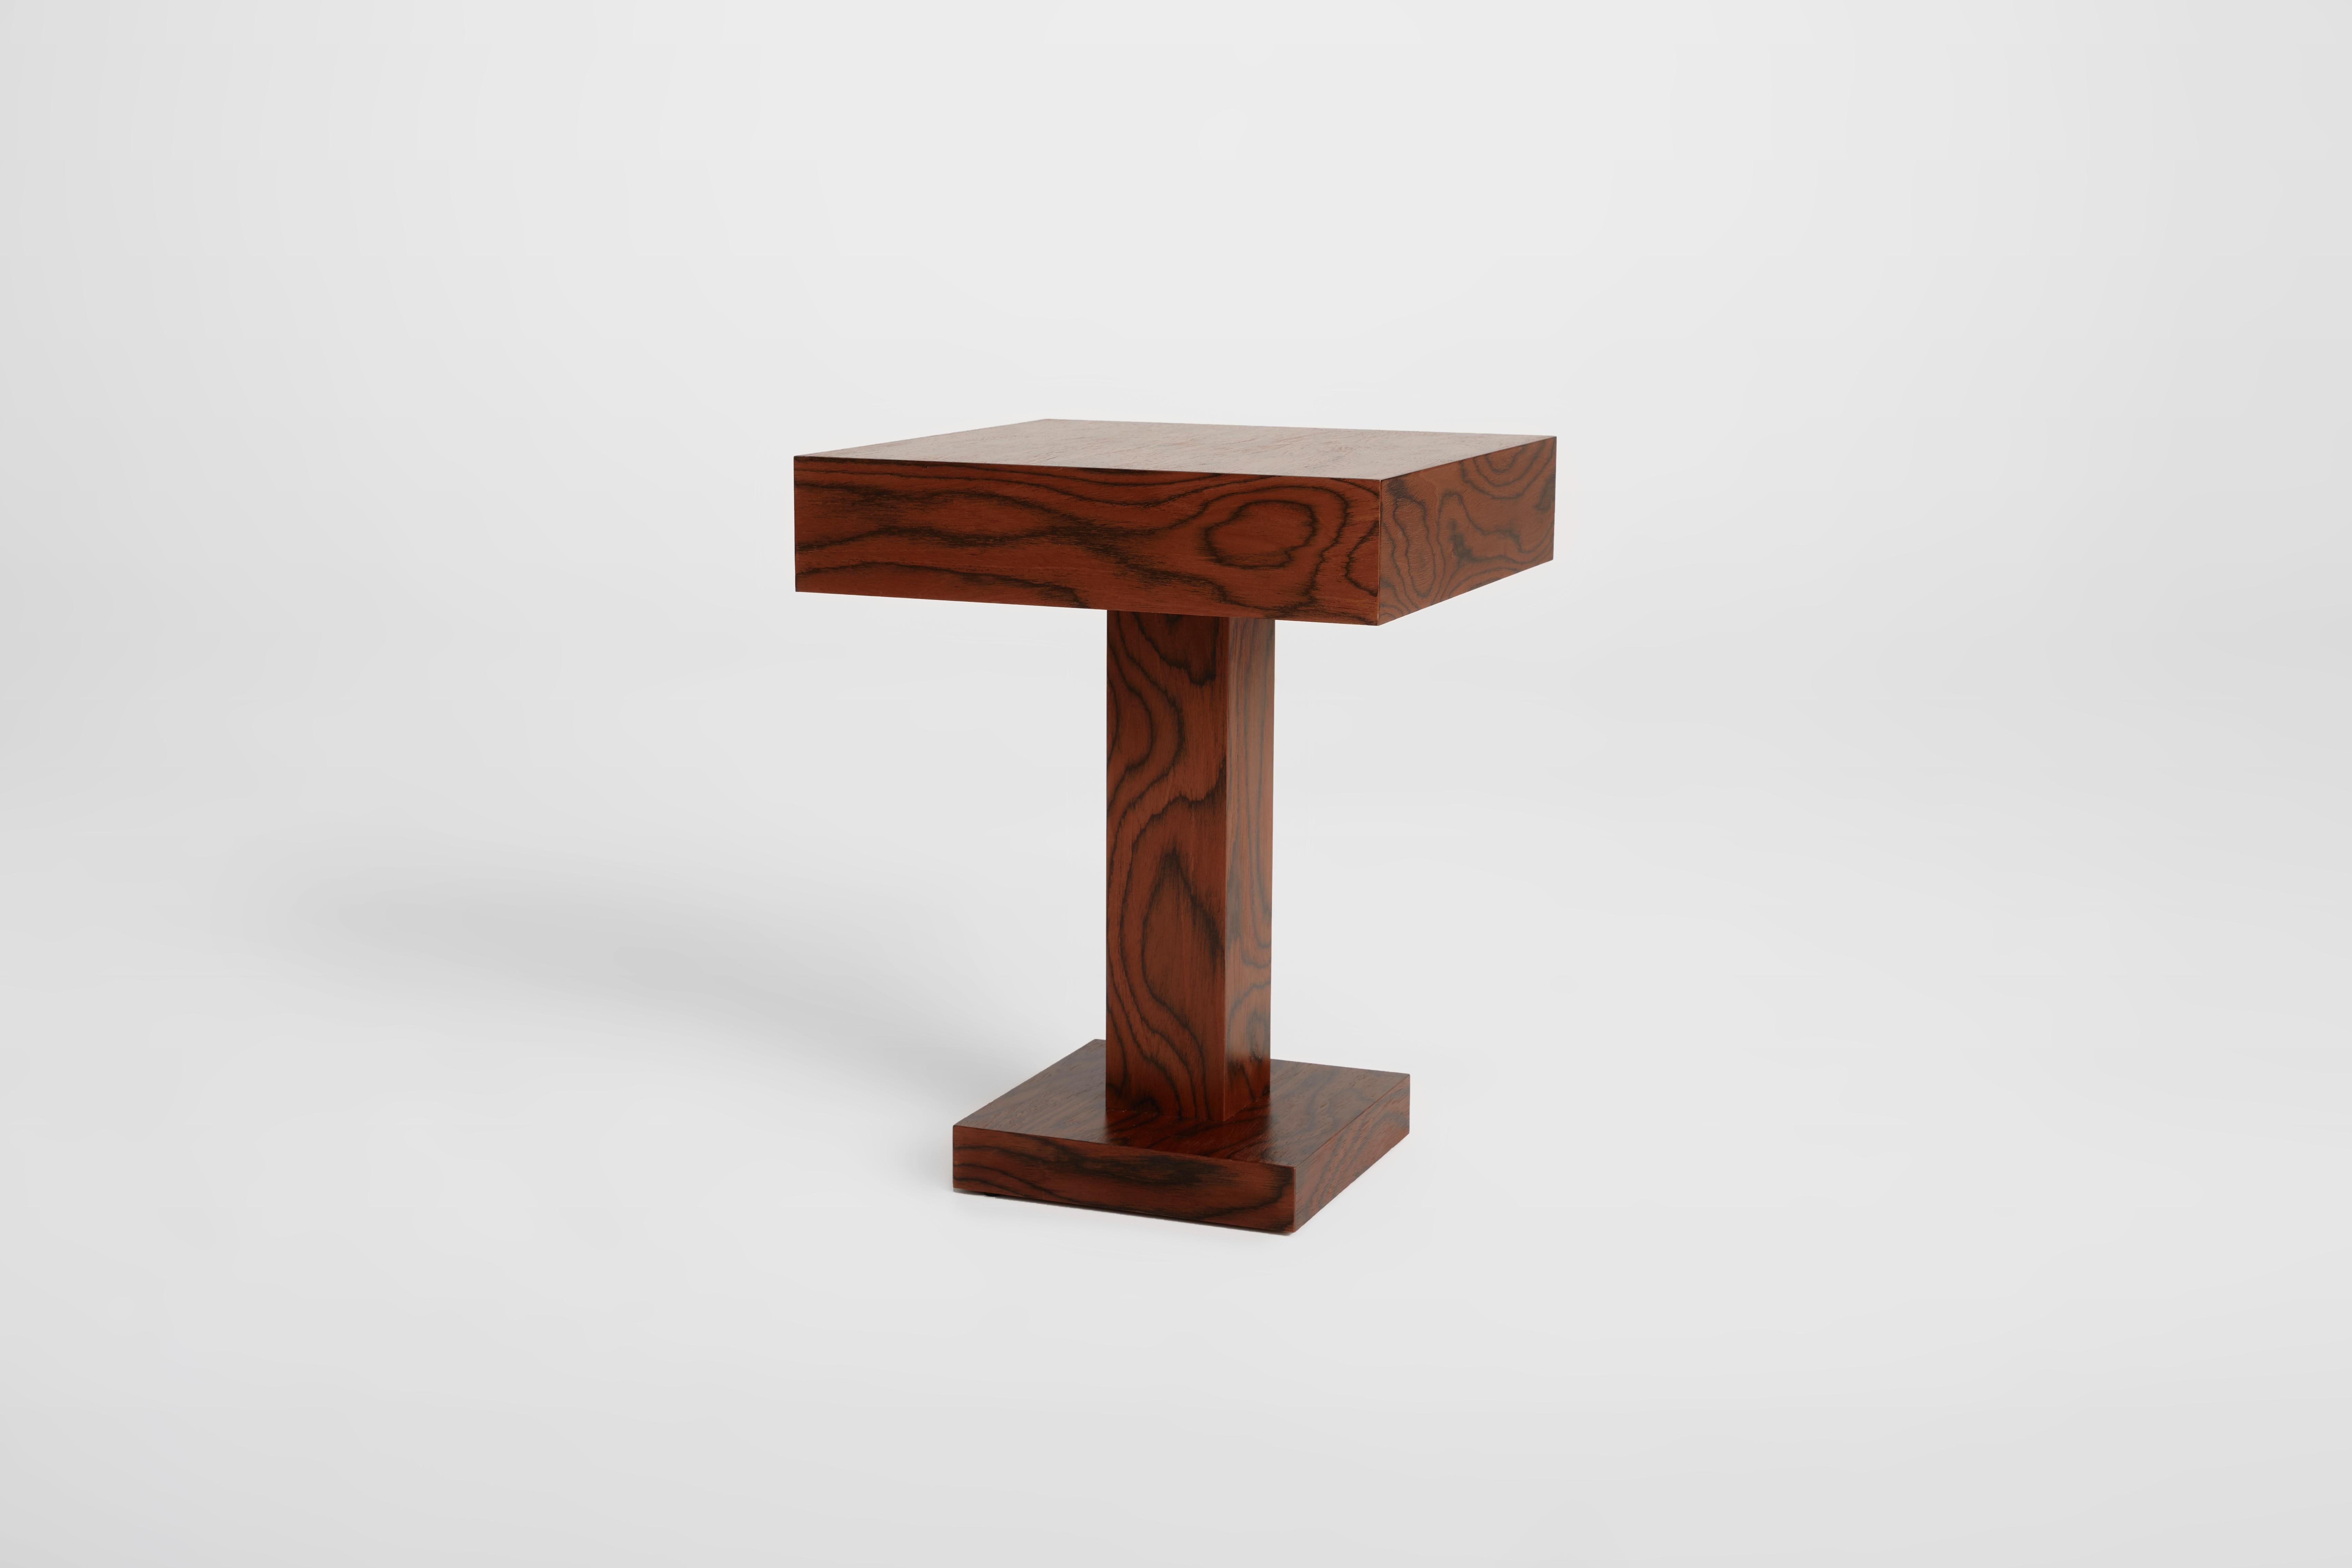 Introducing an unparalleled symbol of sophistication: the exquisite single side table crafted by Petra Madalena, adorned with a mesmerizing multilaminar wood veneer envisioned by the renowned creative genius, Ettore Sottsass.

The meticulously